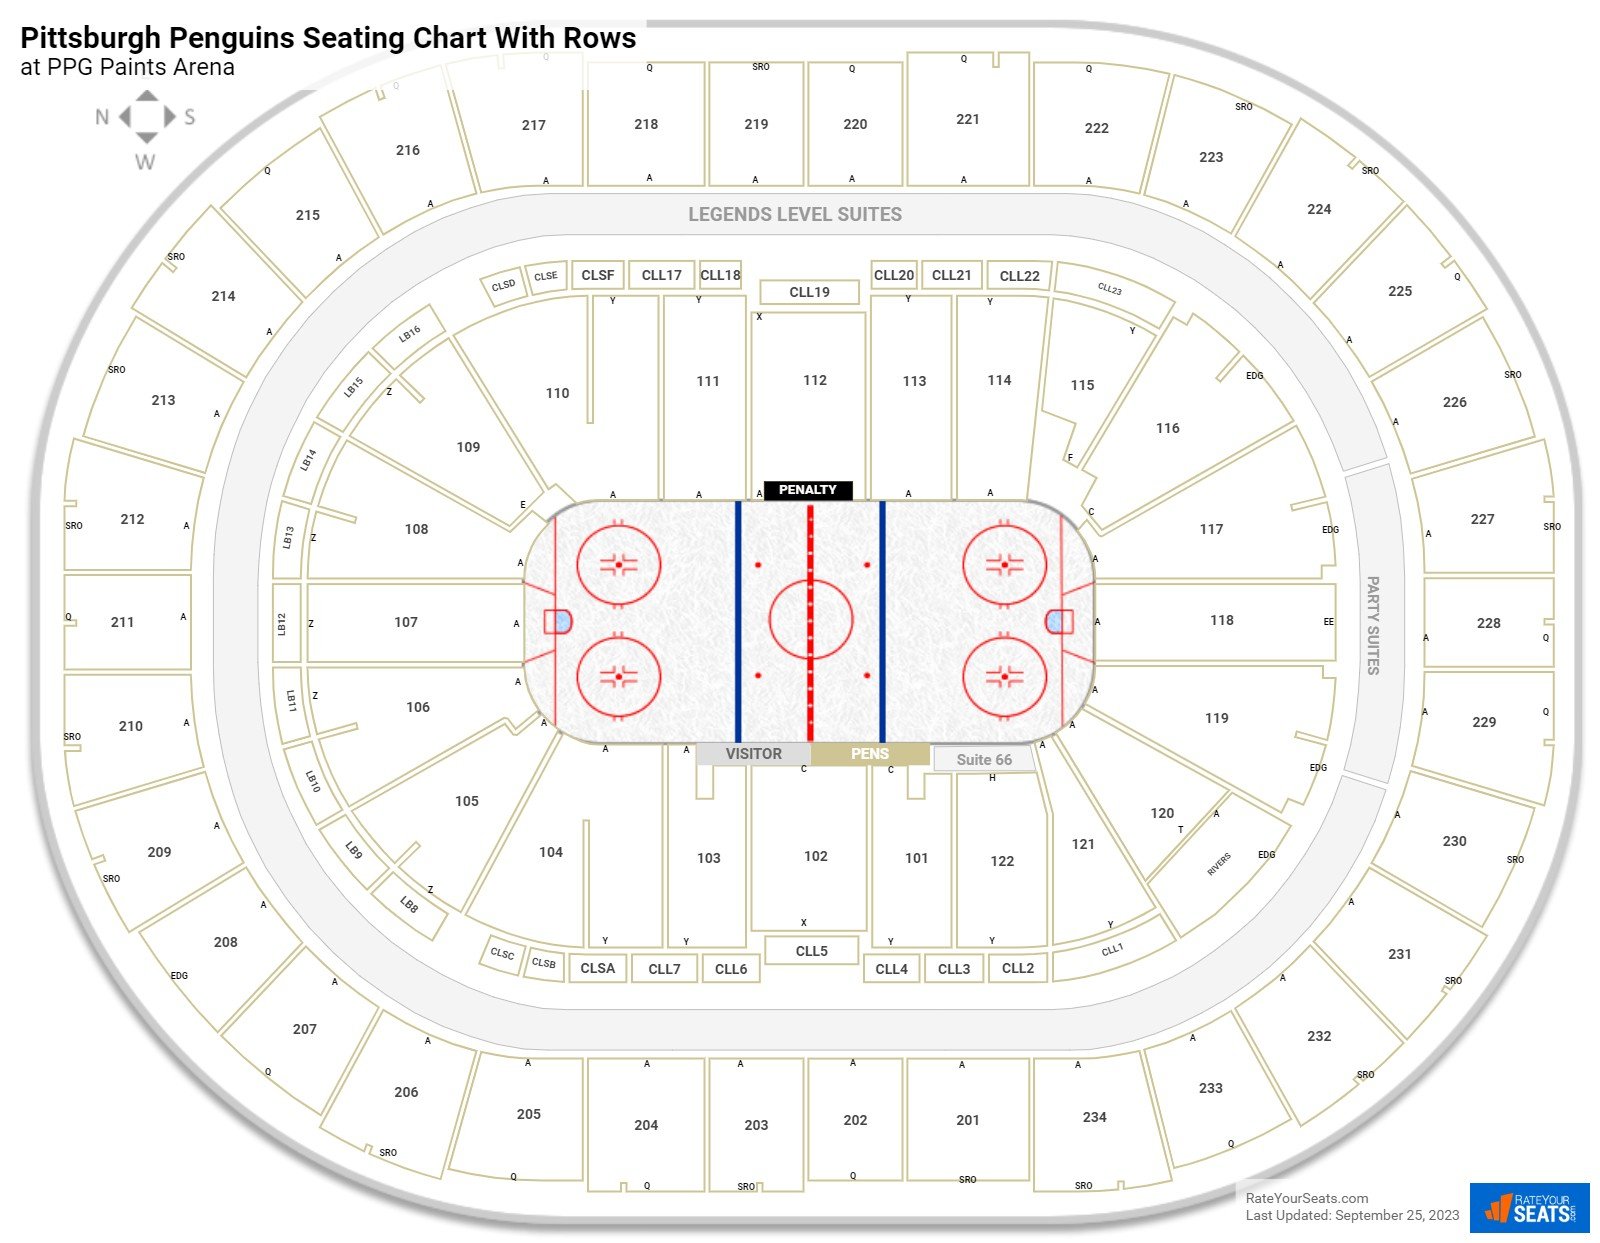 Seating Charts PPG Paints Arena - sadaalomma.com